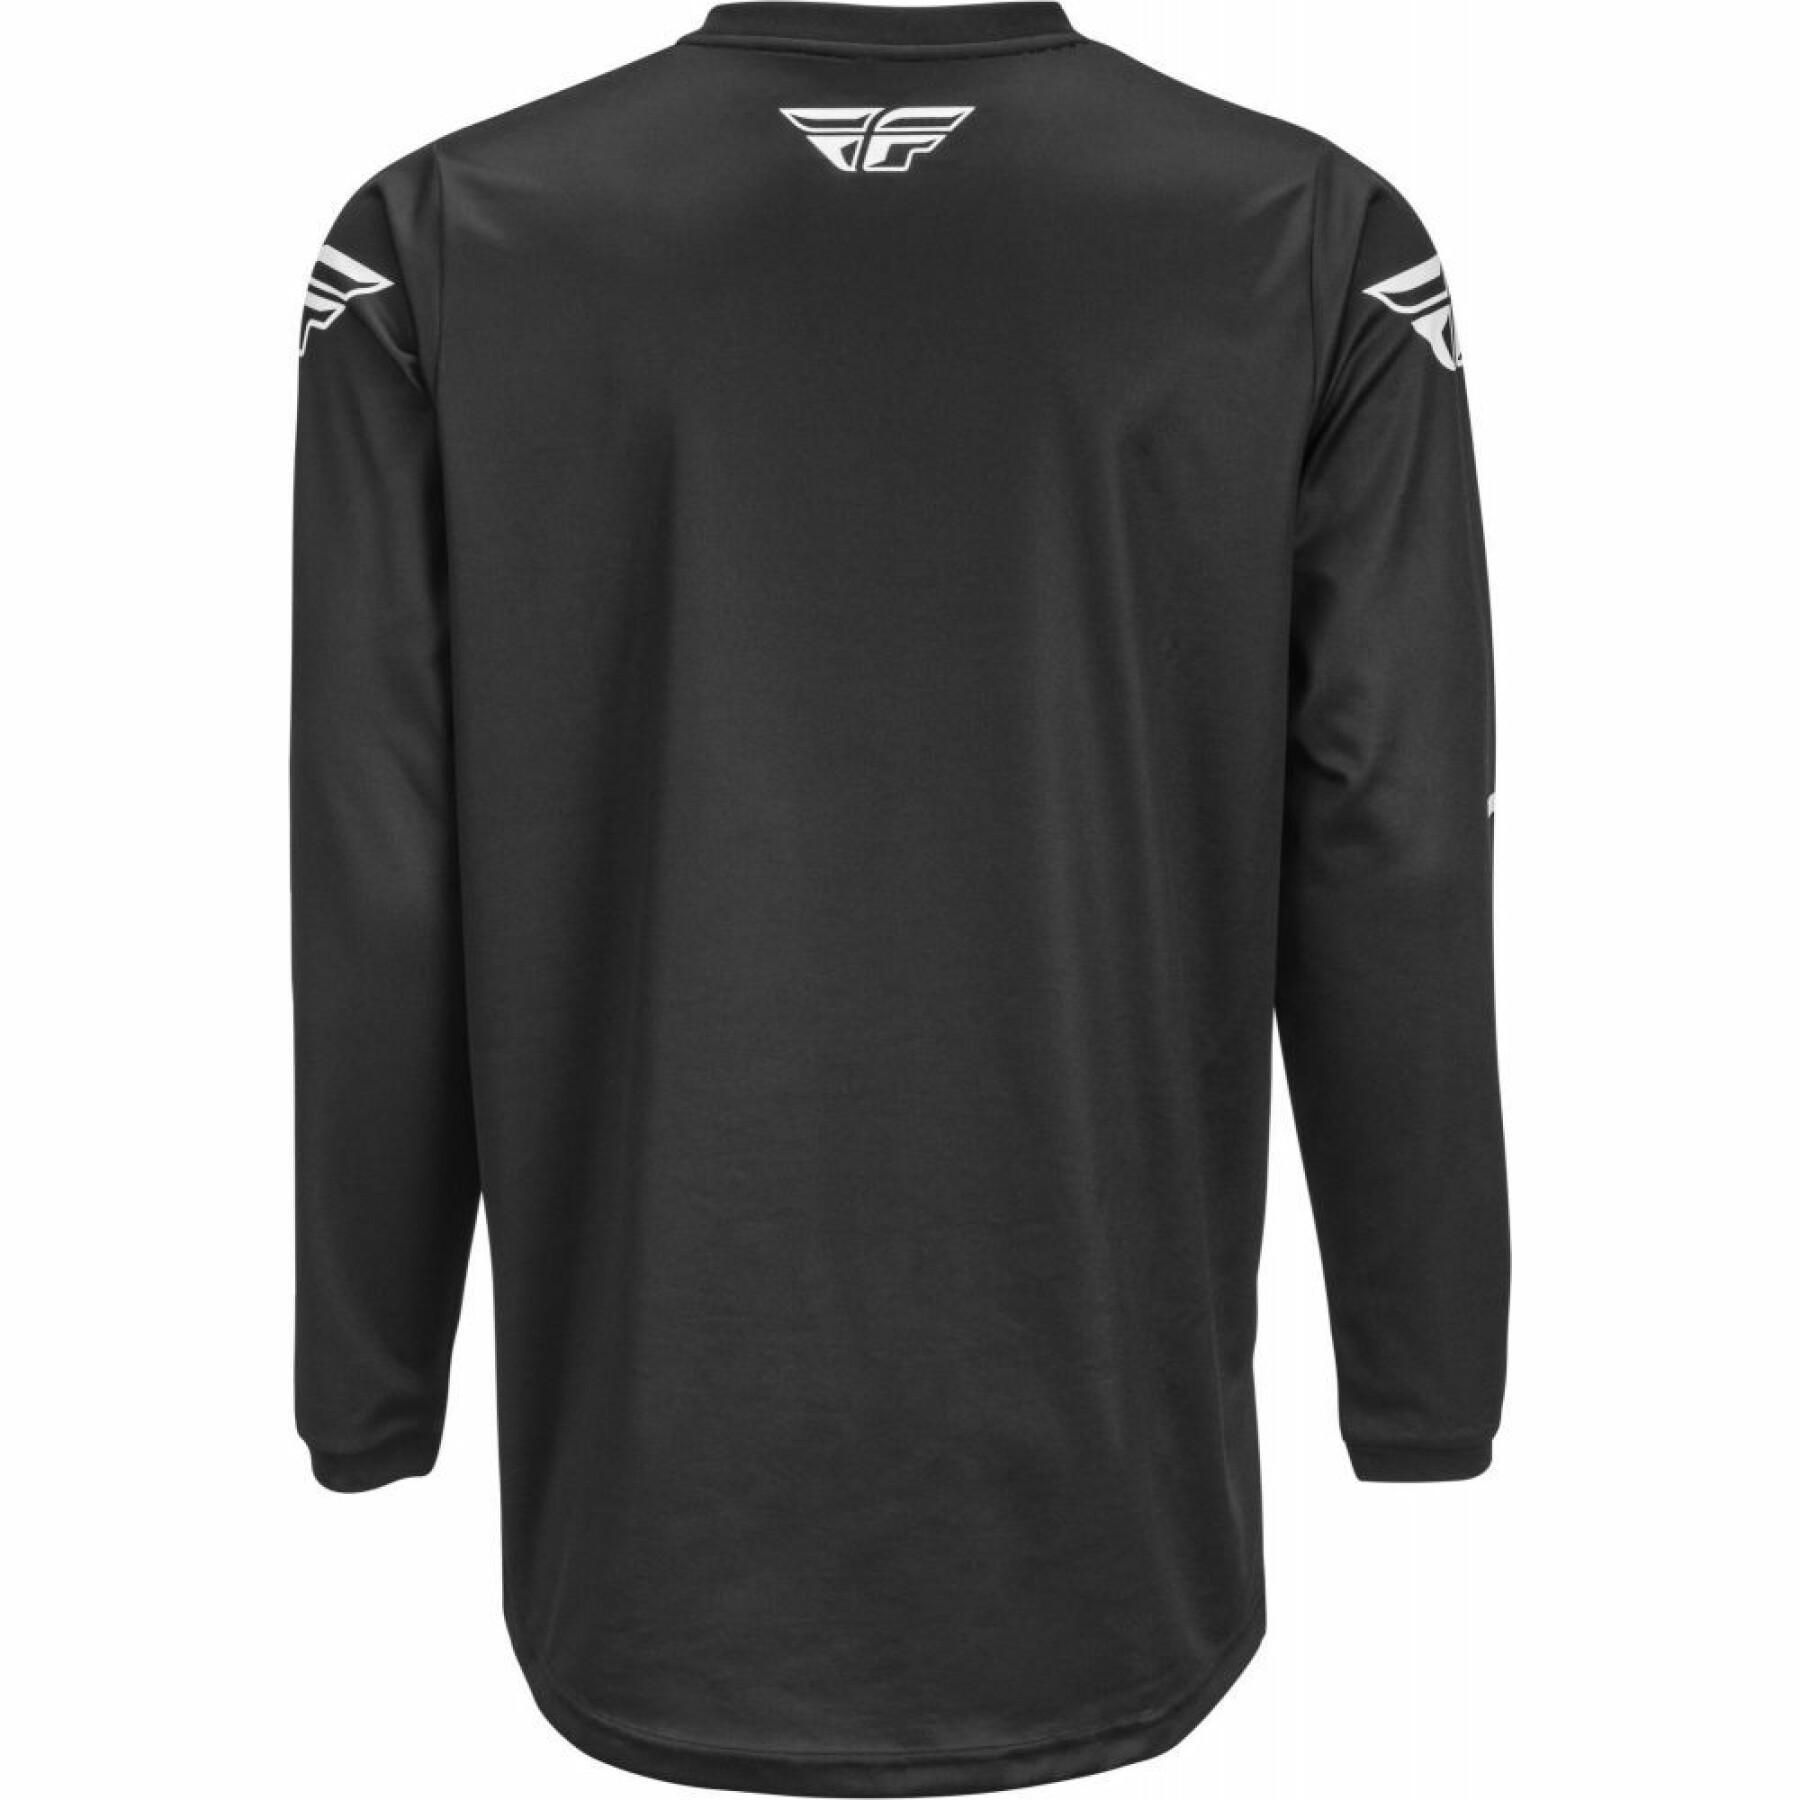 Jersey Fly Racing Universal 2021